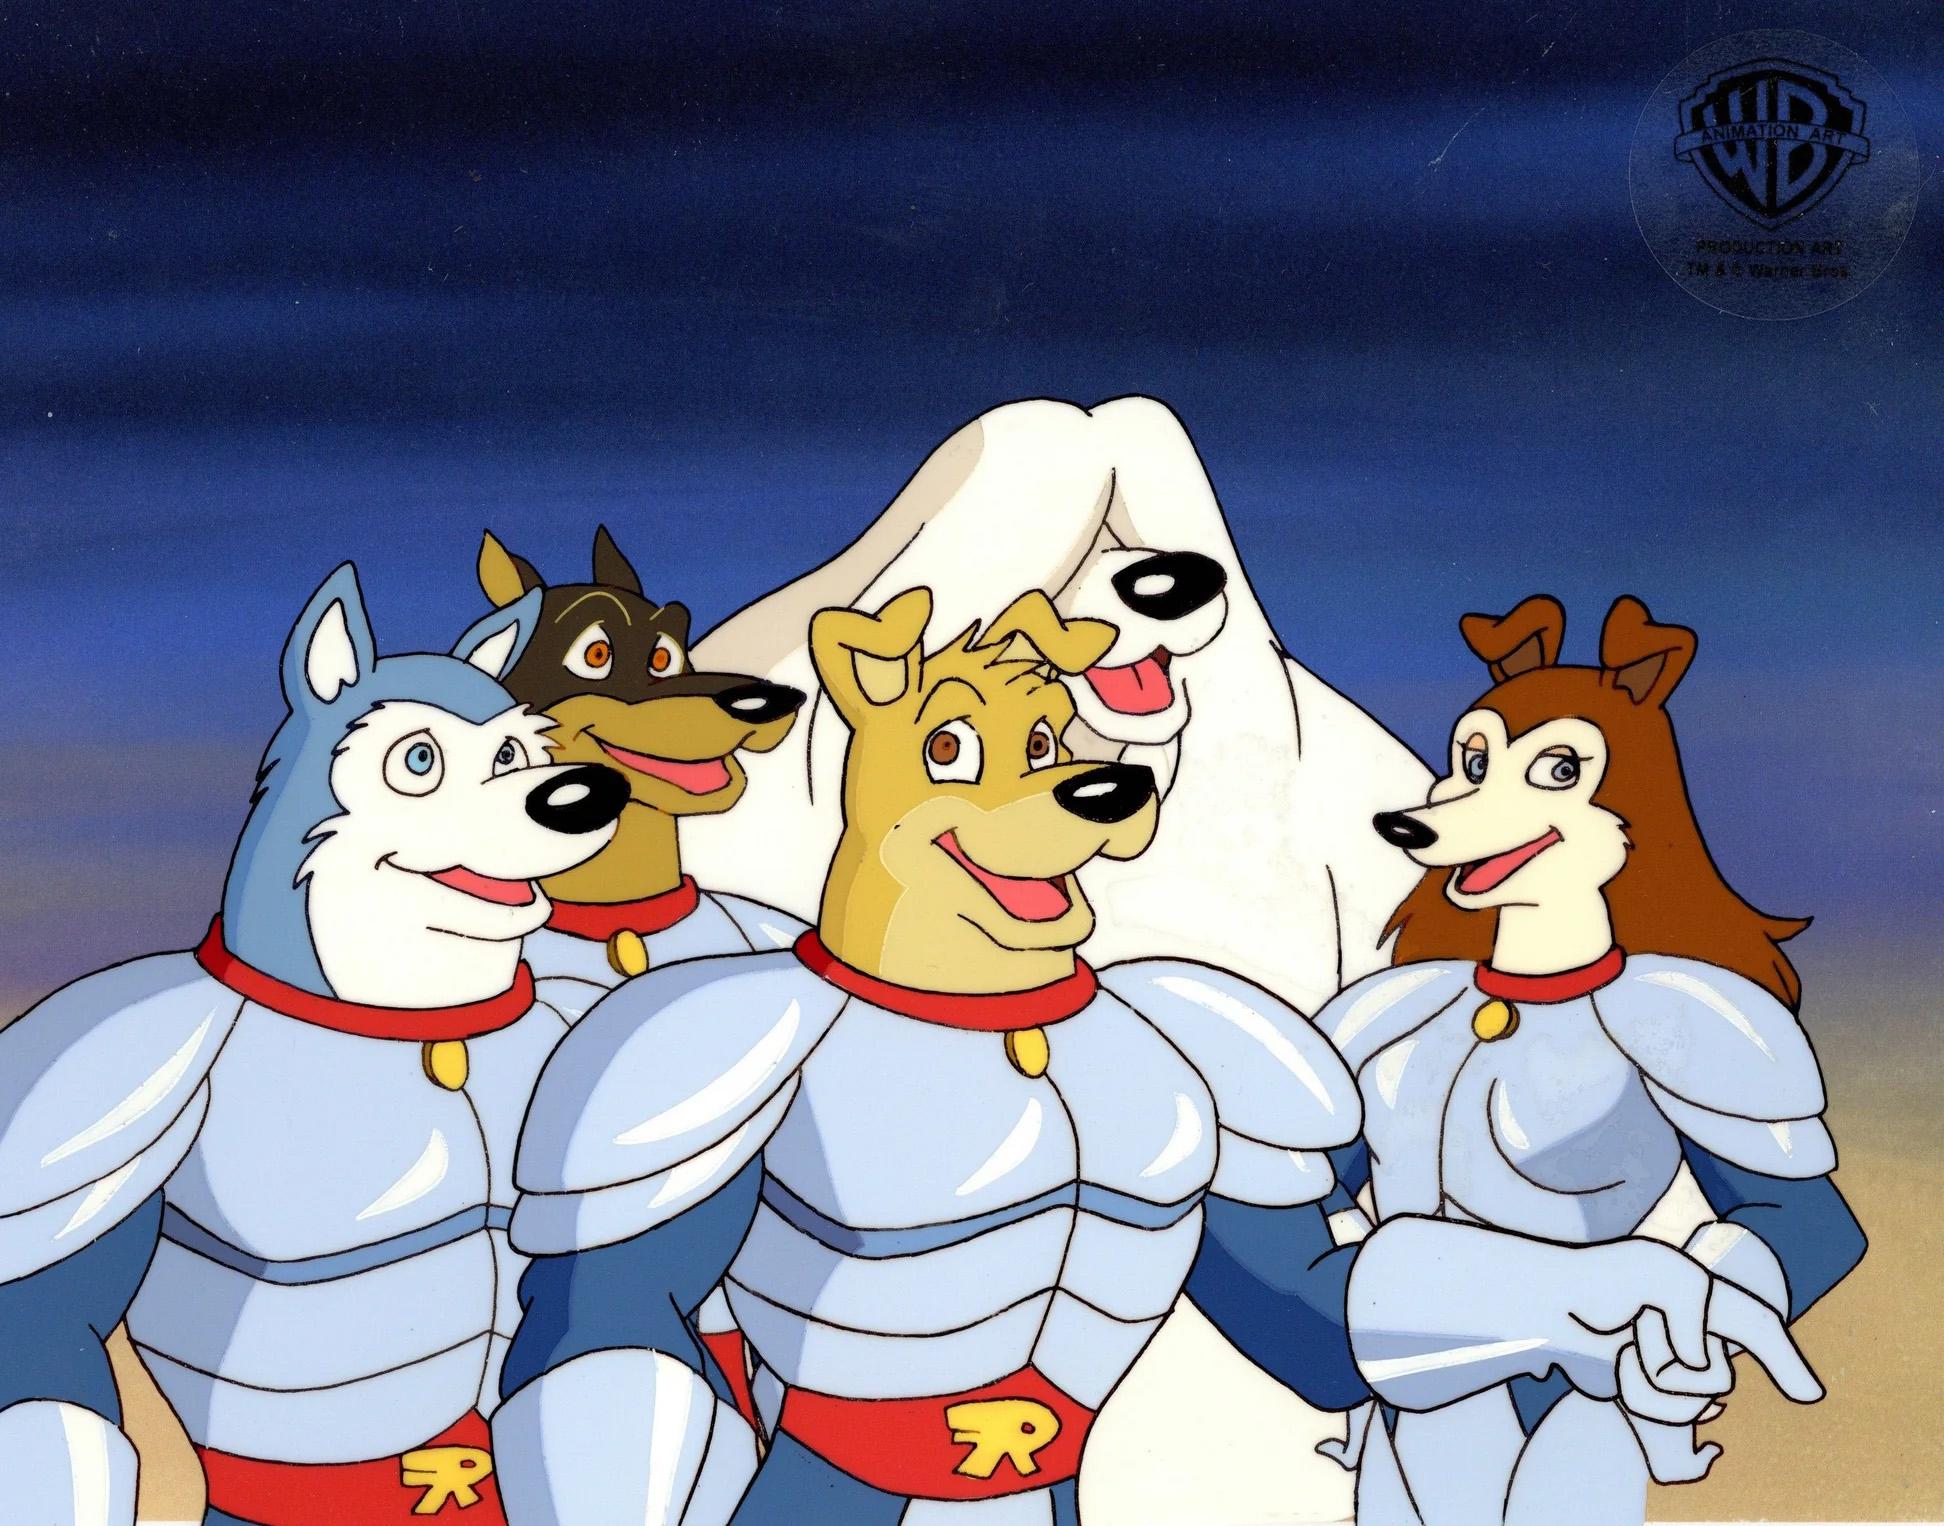 Road Rovers Original Production Cel: Hunter, Shag, Colleen, Blitz, and Exile - Art by Warner Bros. Studio Artists